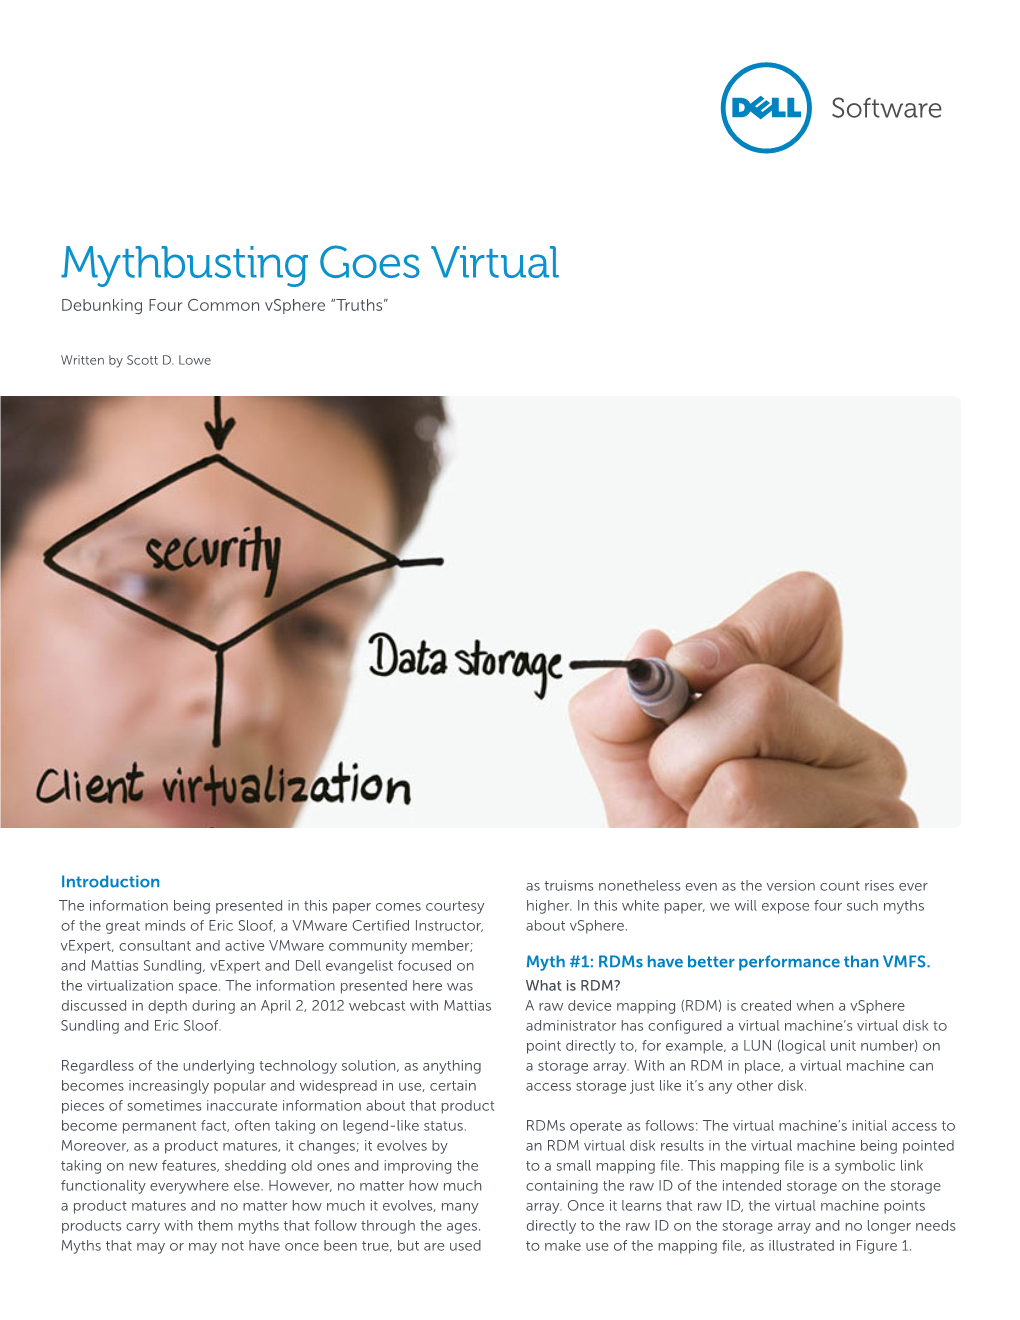 Mythbusting Goes Virtual Debunking Four Common Vsphere “Truths”